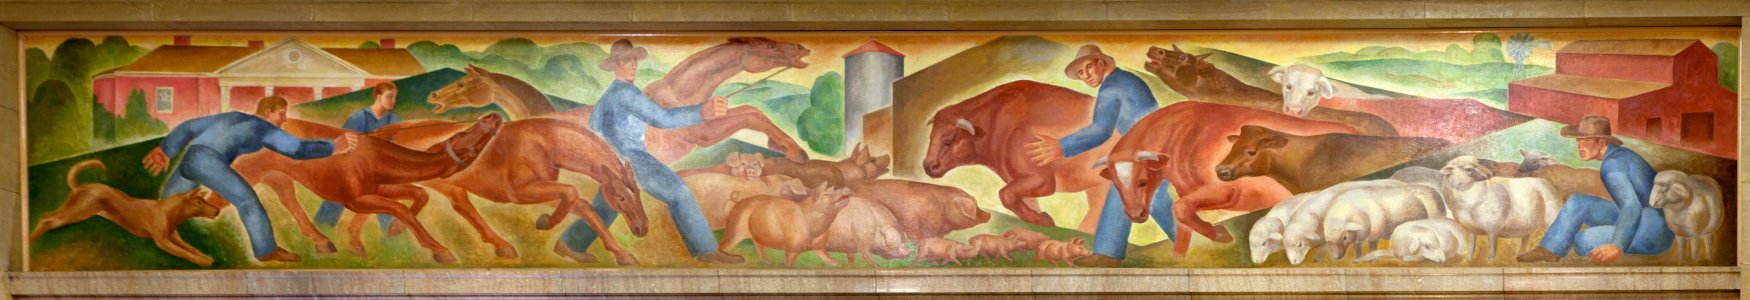 Murals, Louisville Murals-Stock Farming, by Frank Weathers Long at the Gene Snyder U.S Courthouse & Custom House, Louisville, Kentucky (2011) by Carol M. Highsmith. Original image from Library of Congress. photo